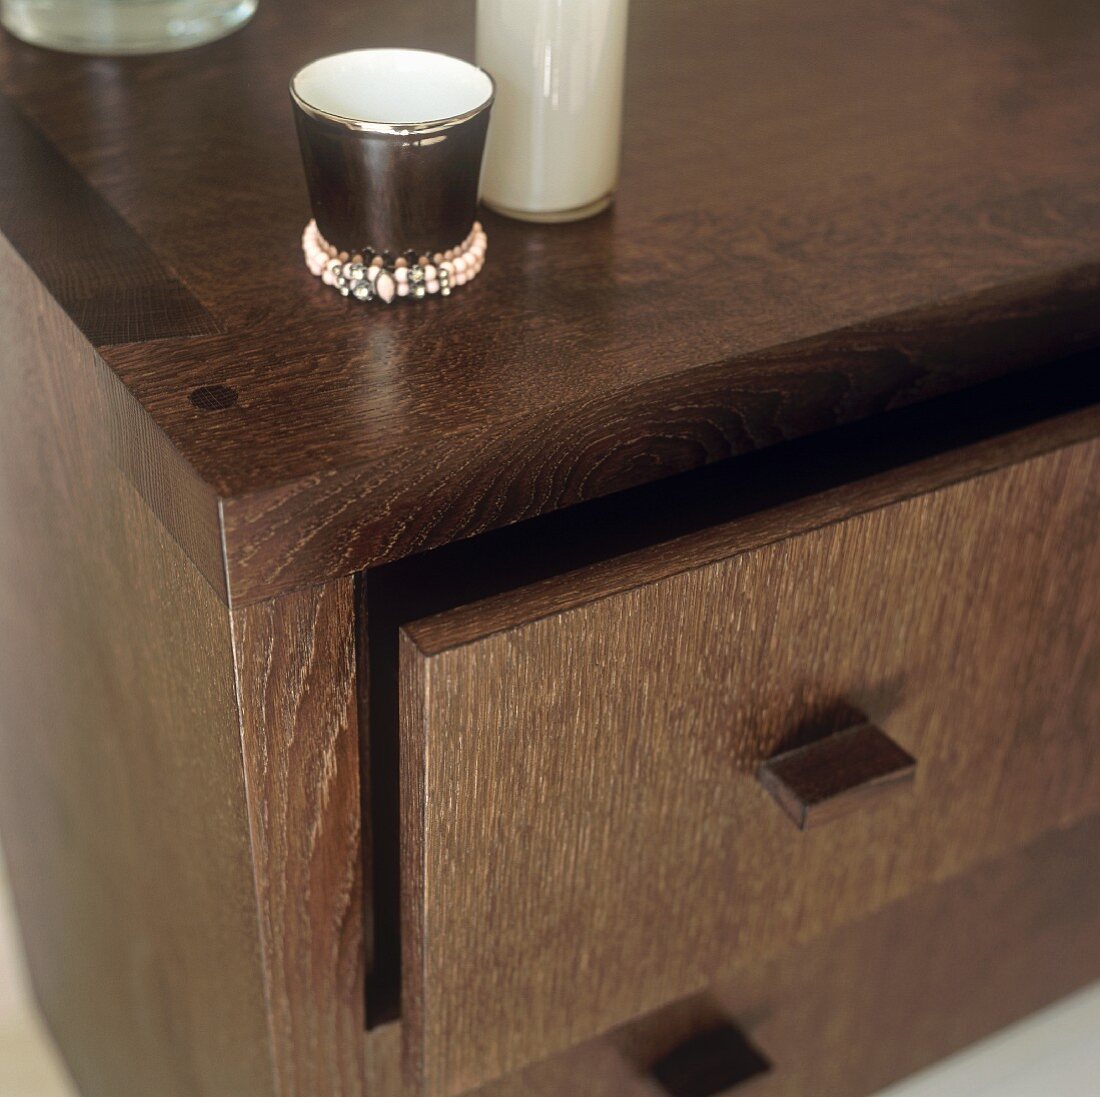 A decorative porcelain cup on a chest of drawers made of dark wood